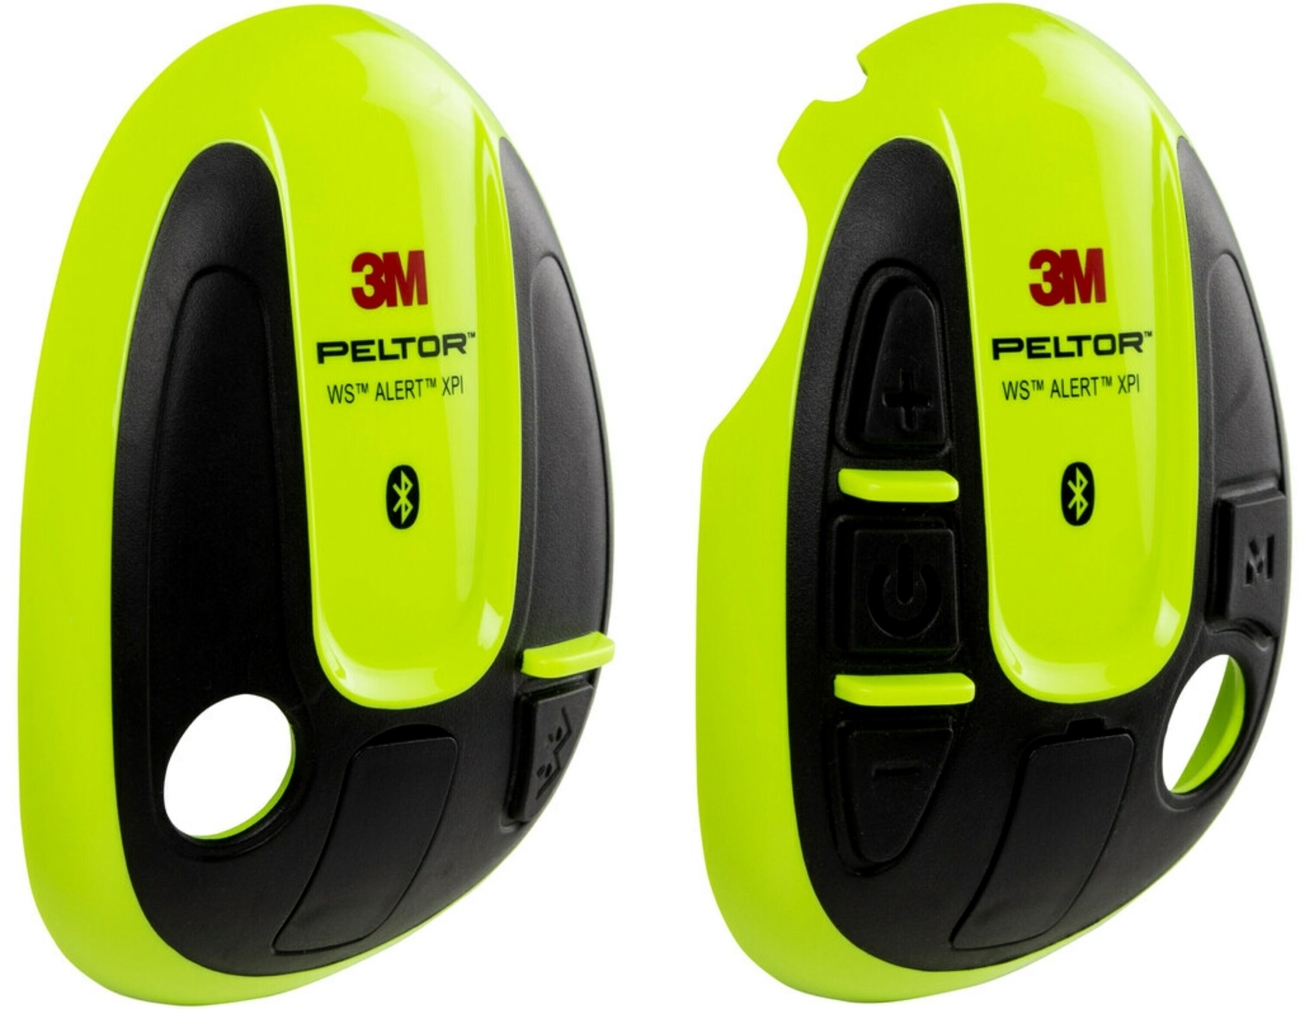 3M PELTOR covers for WS ALERT headsets, neon green, 1 pair (left right), 210300-664-GB/1